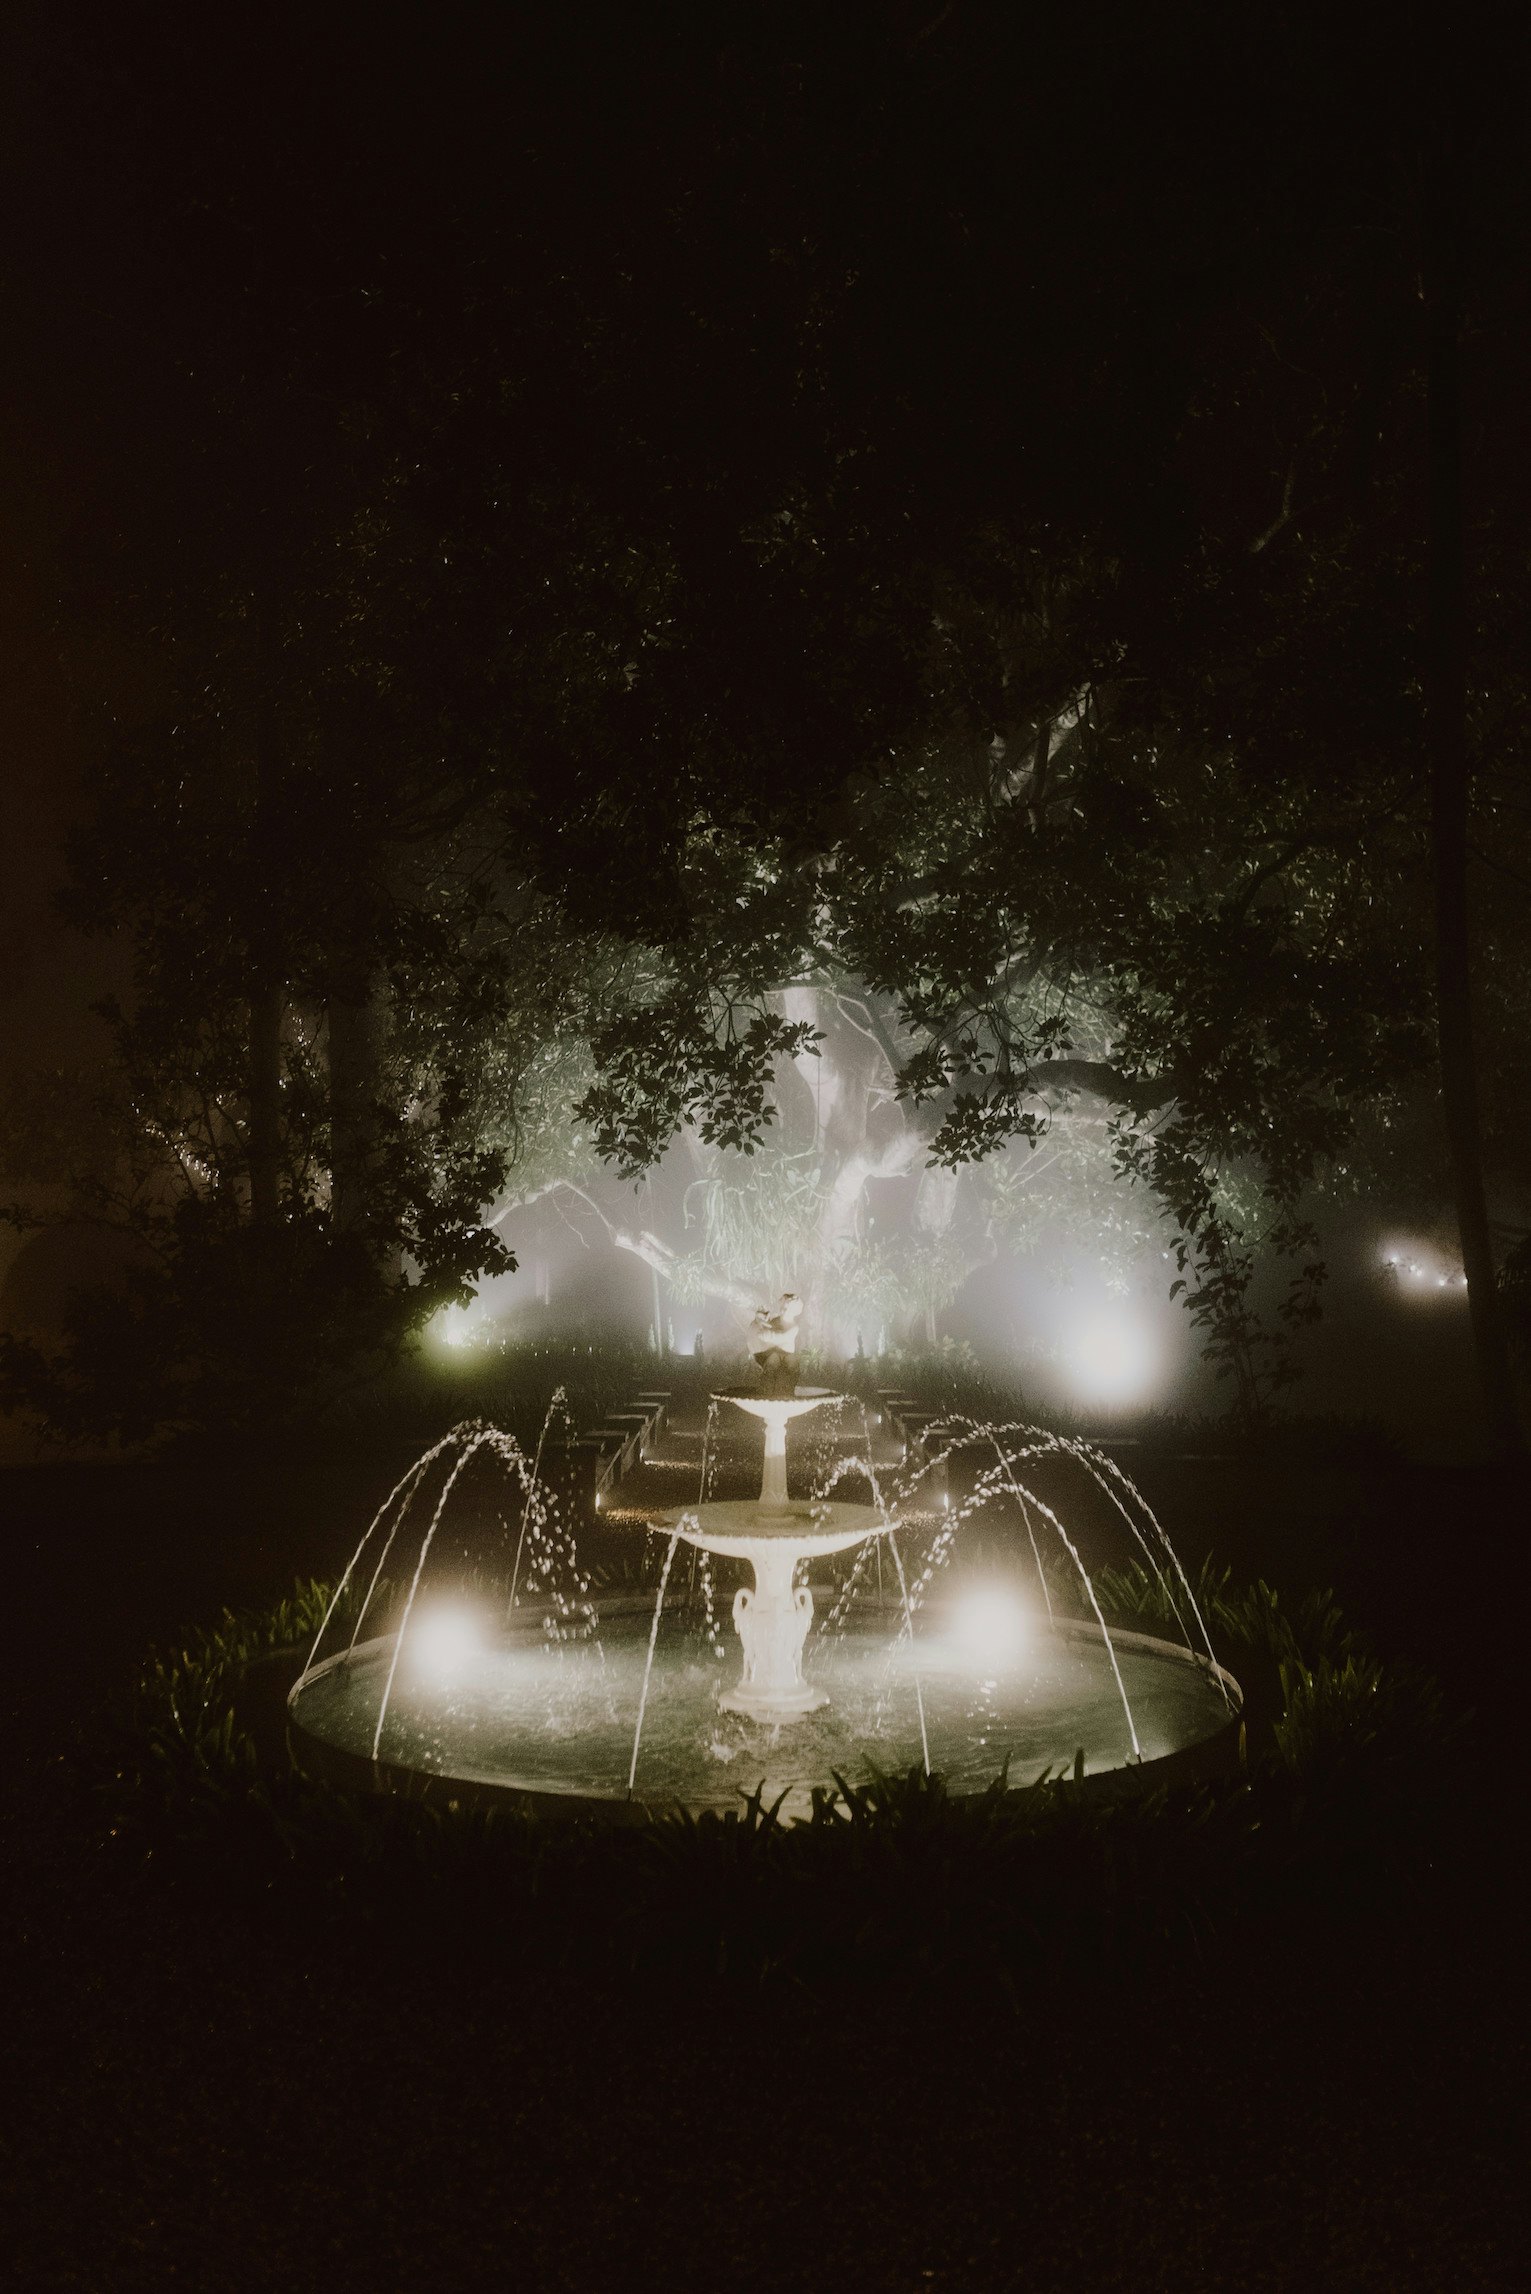 Fountain at night time 